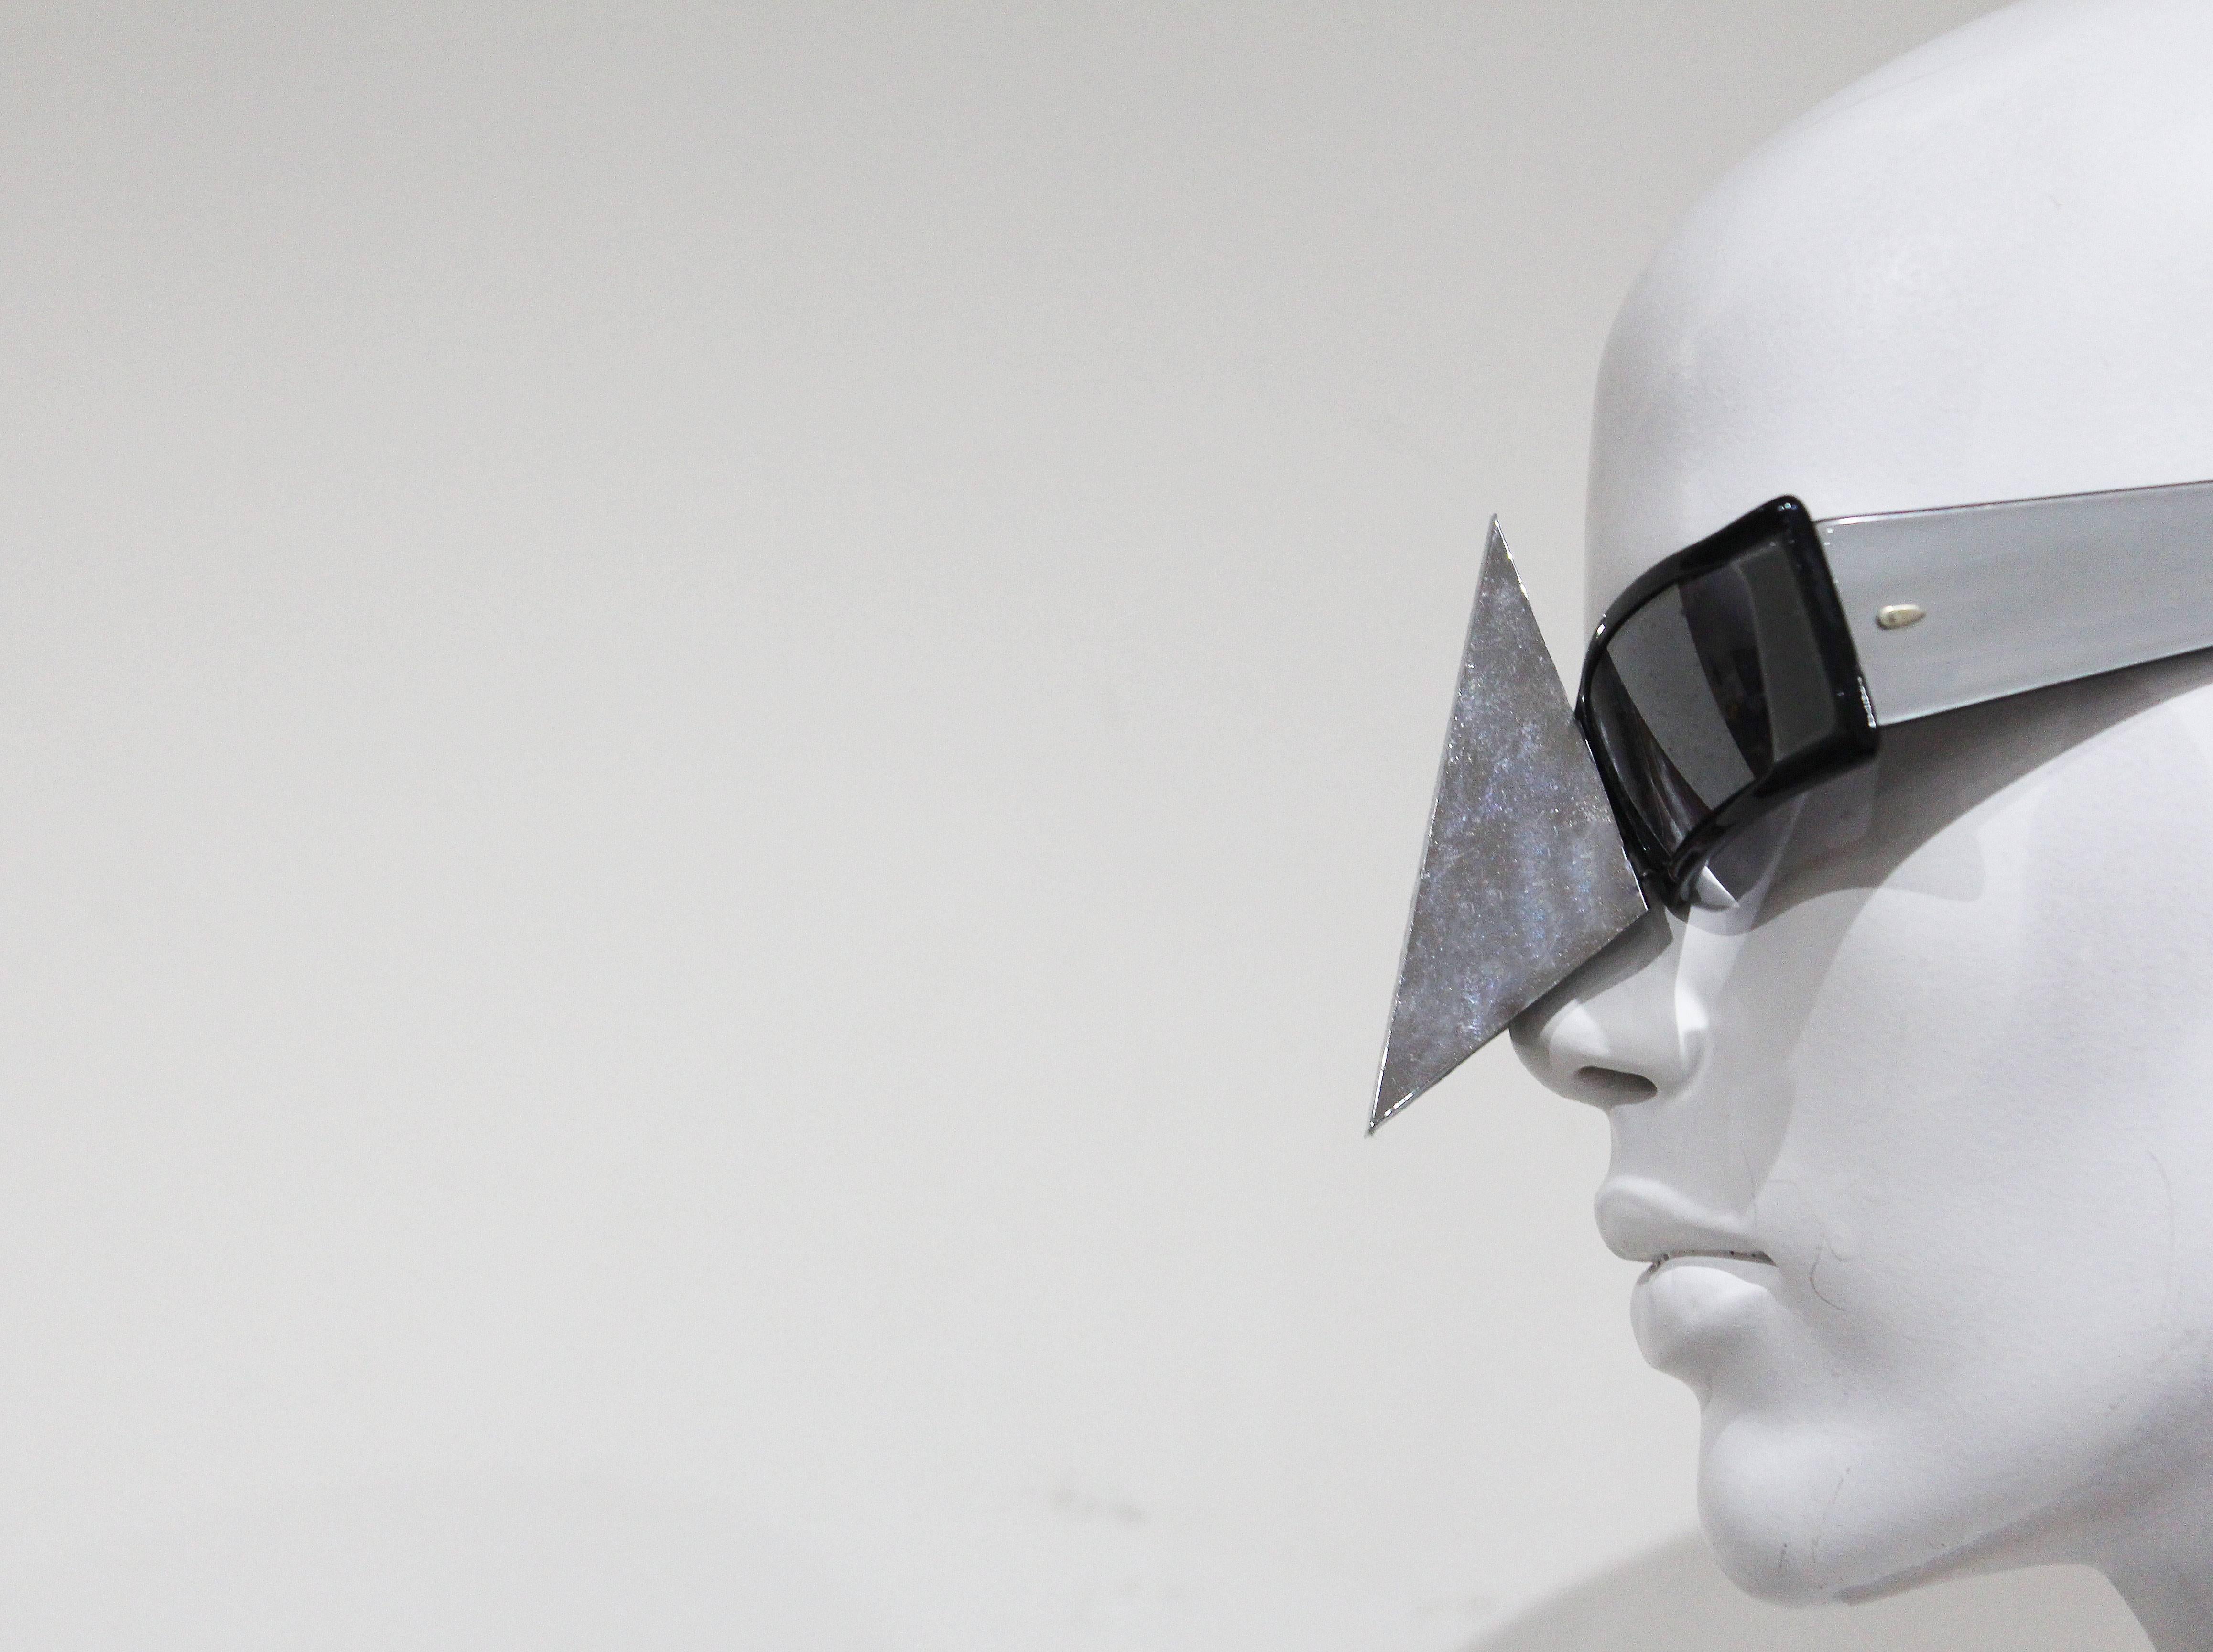 A very rare pair of nose shield sunglasses by Alain Mikli, made in 1988. 